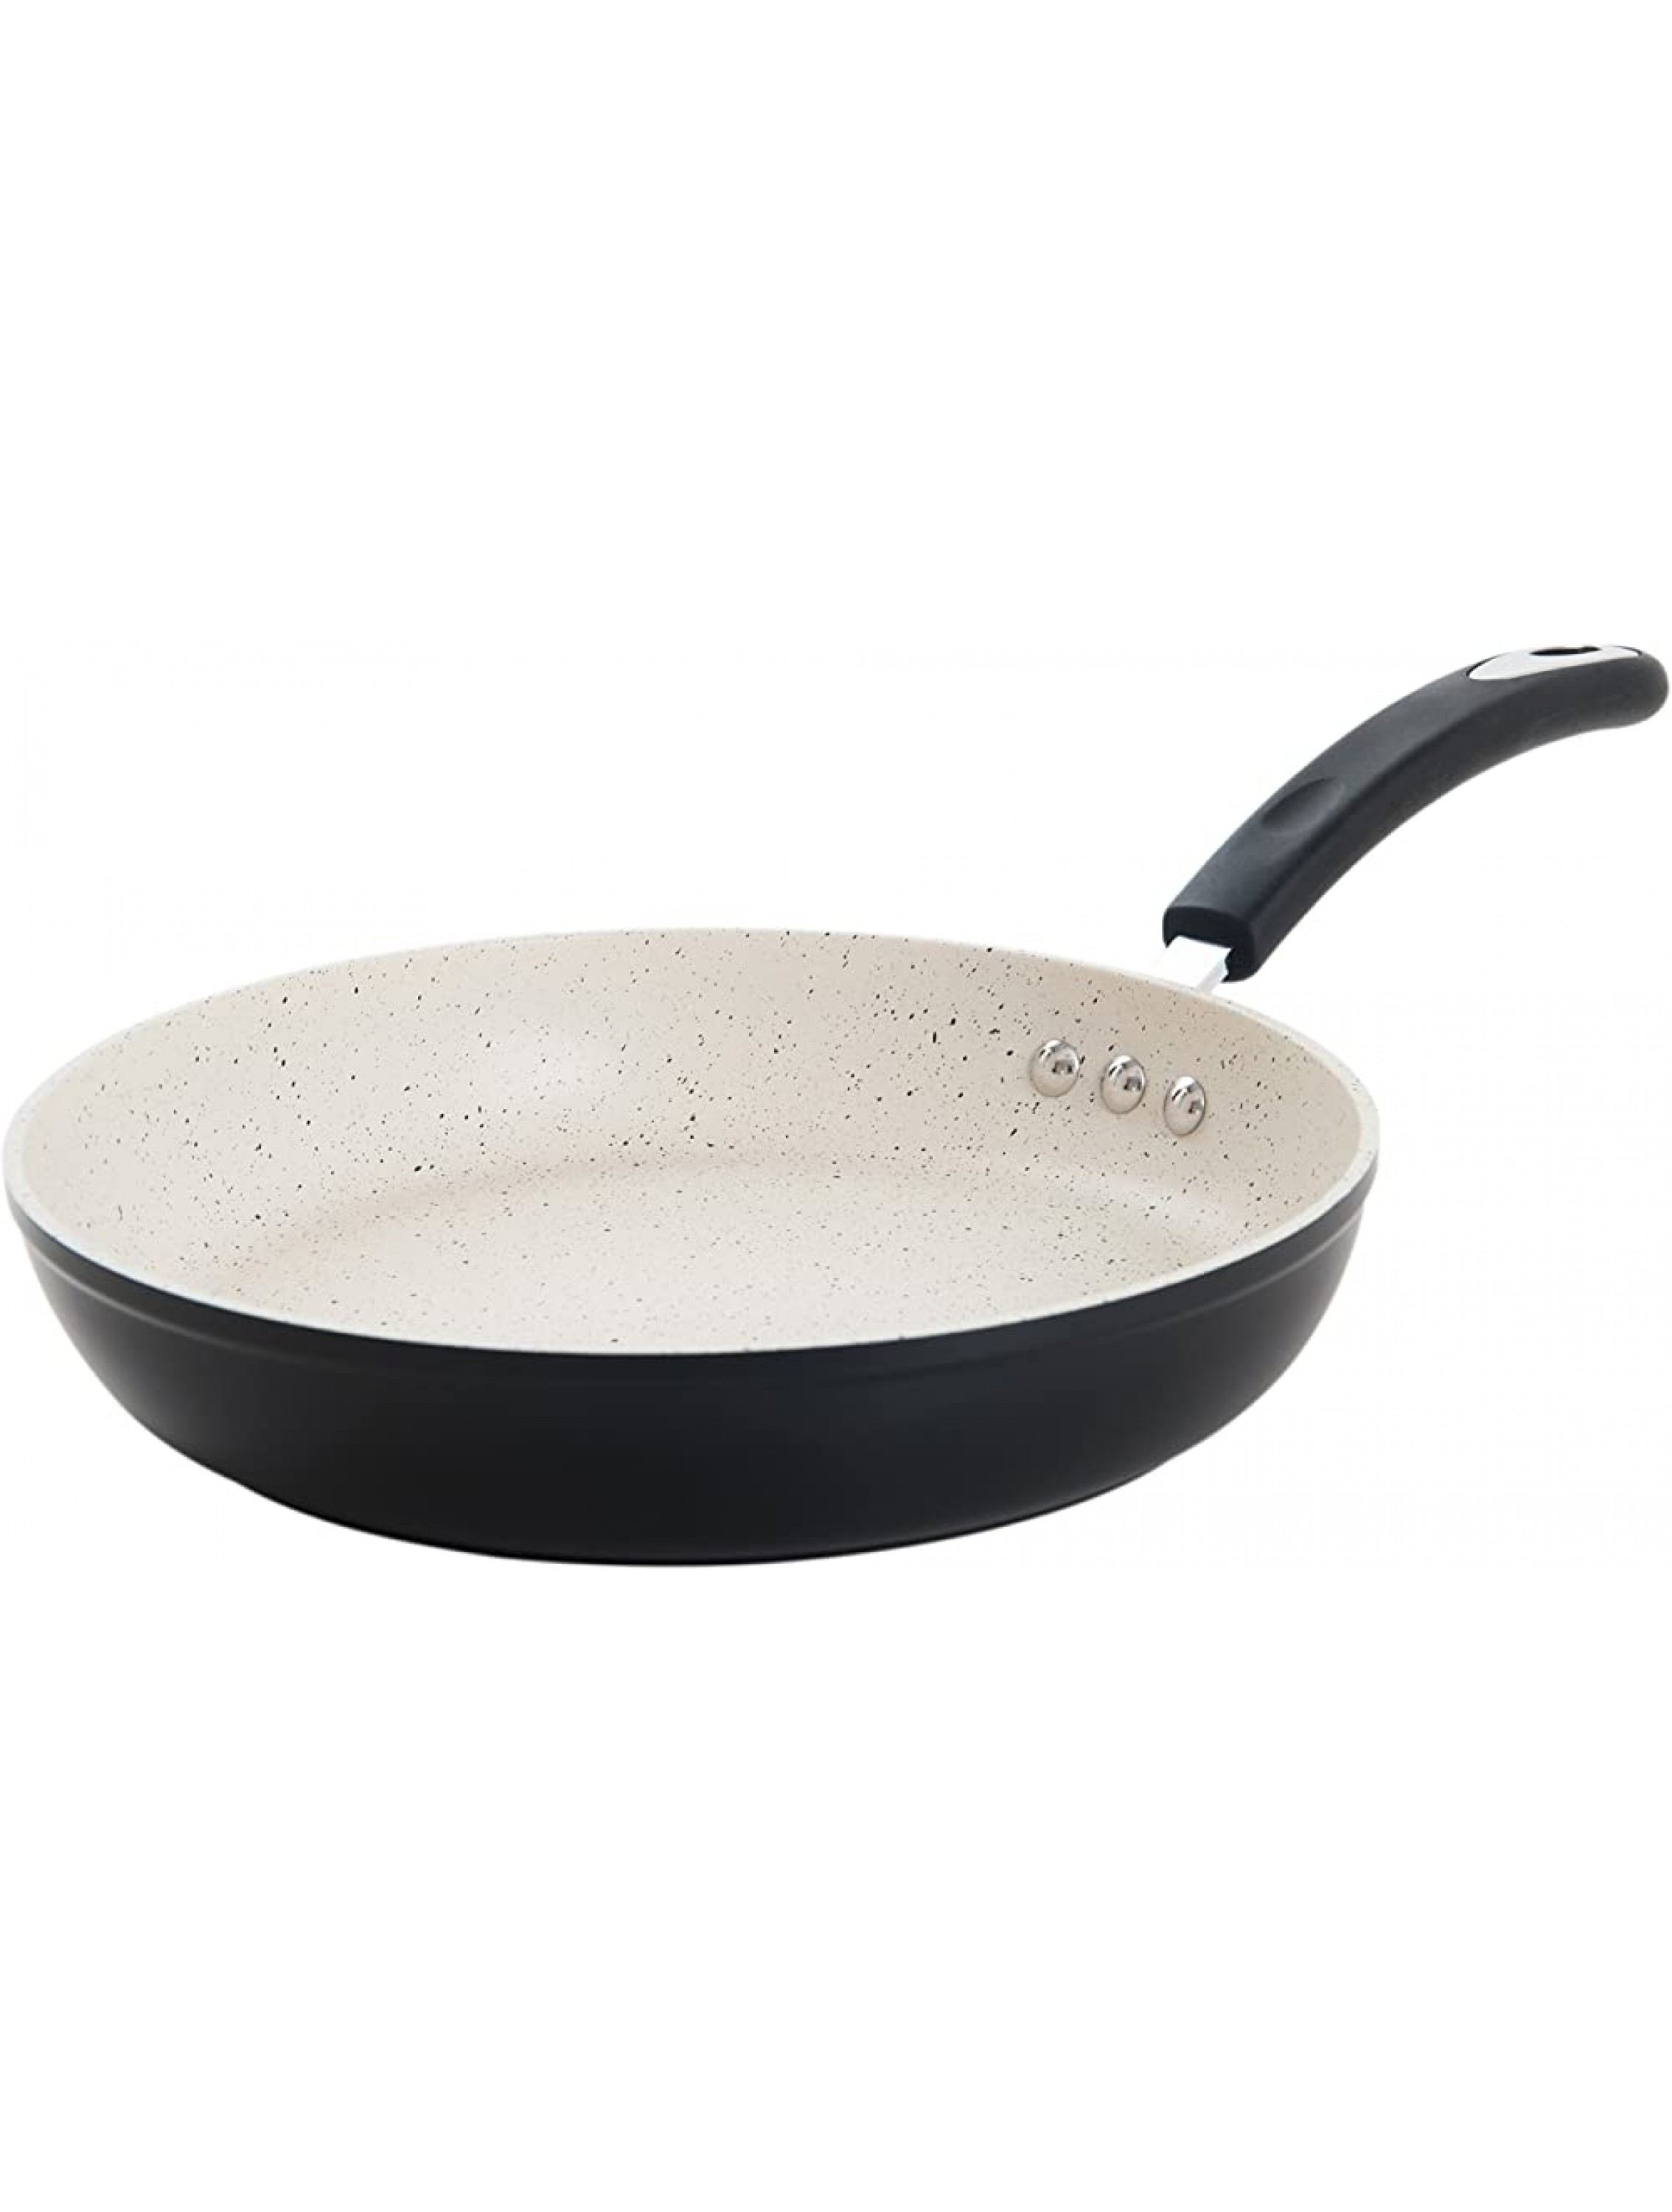 12 Stone Earth Frying Pan by Ozeri with 100% APEO & PFOA-Free Stone-Derived Non-Stick Coating from Germany - BNGFXVDJY